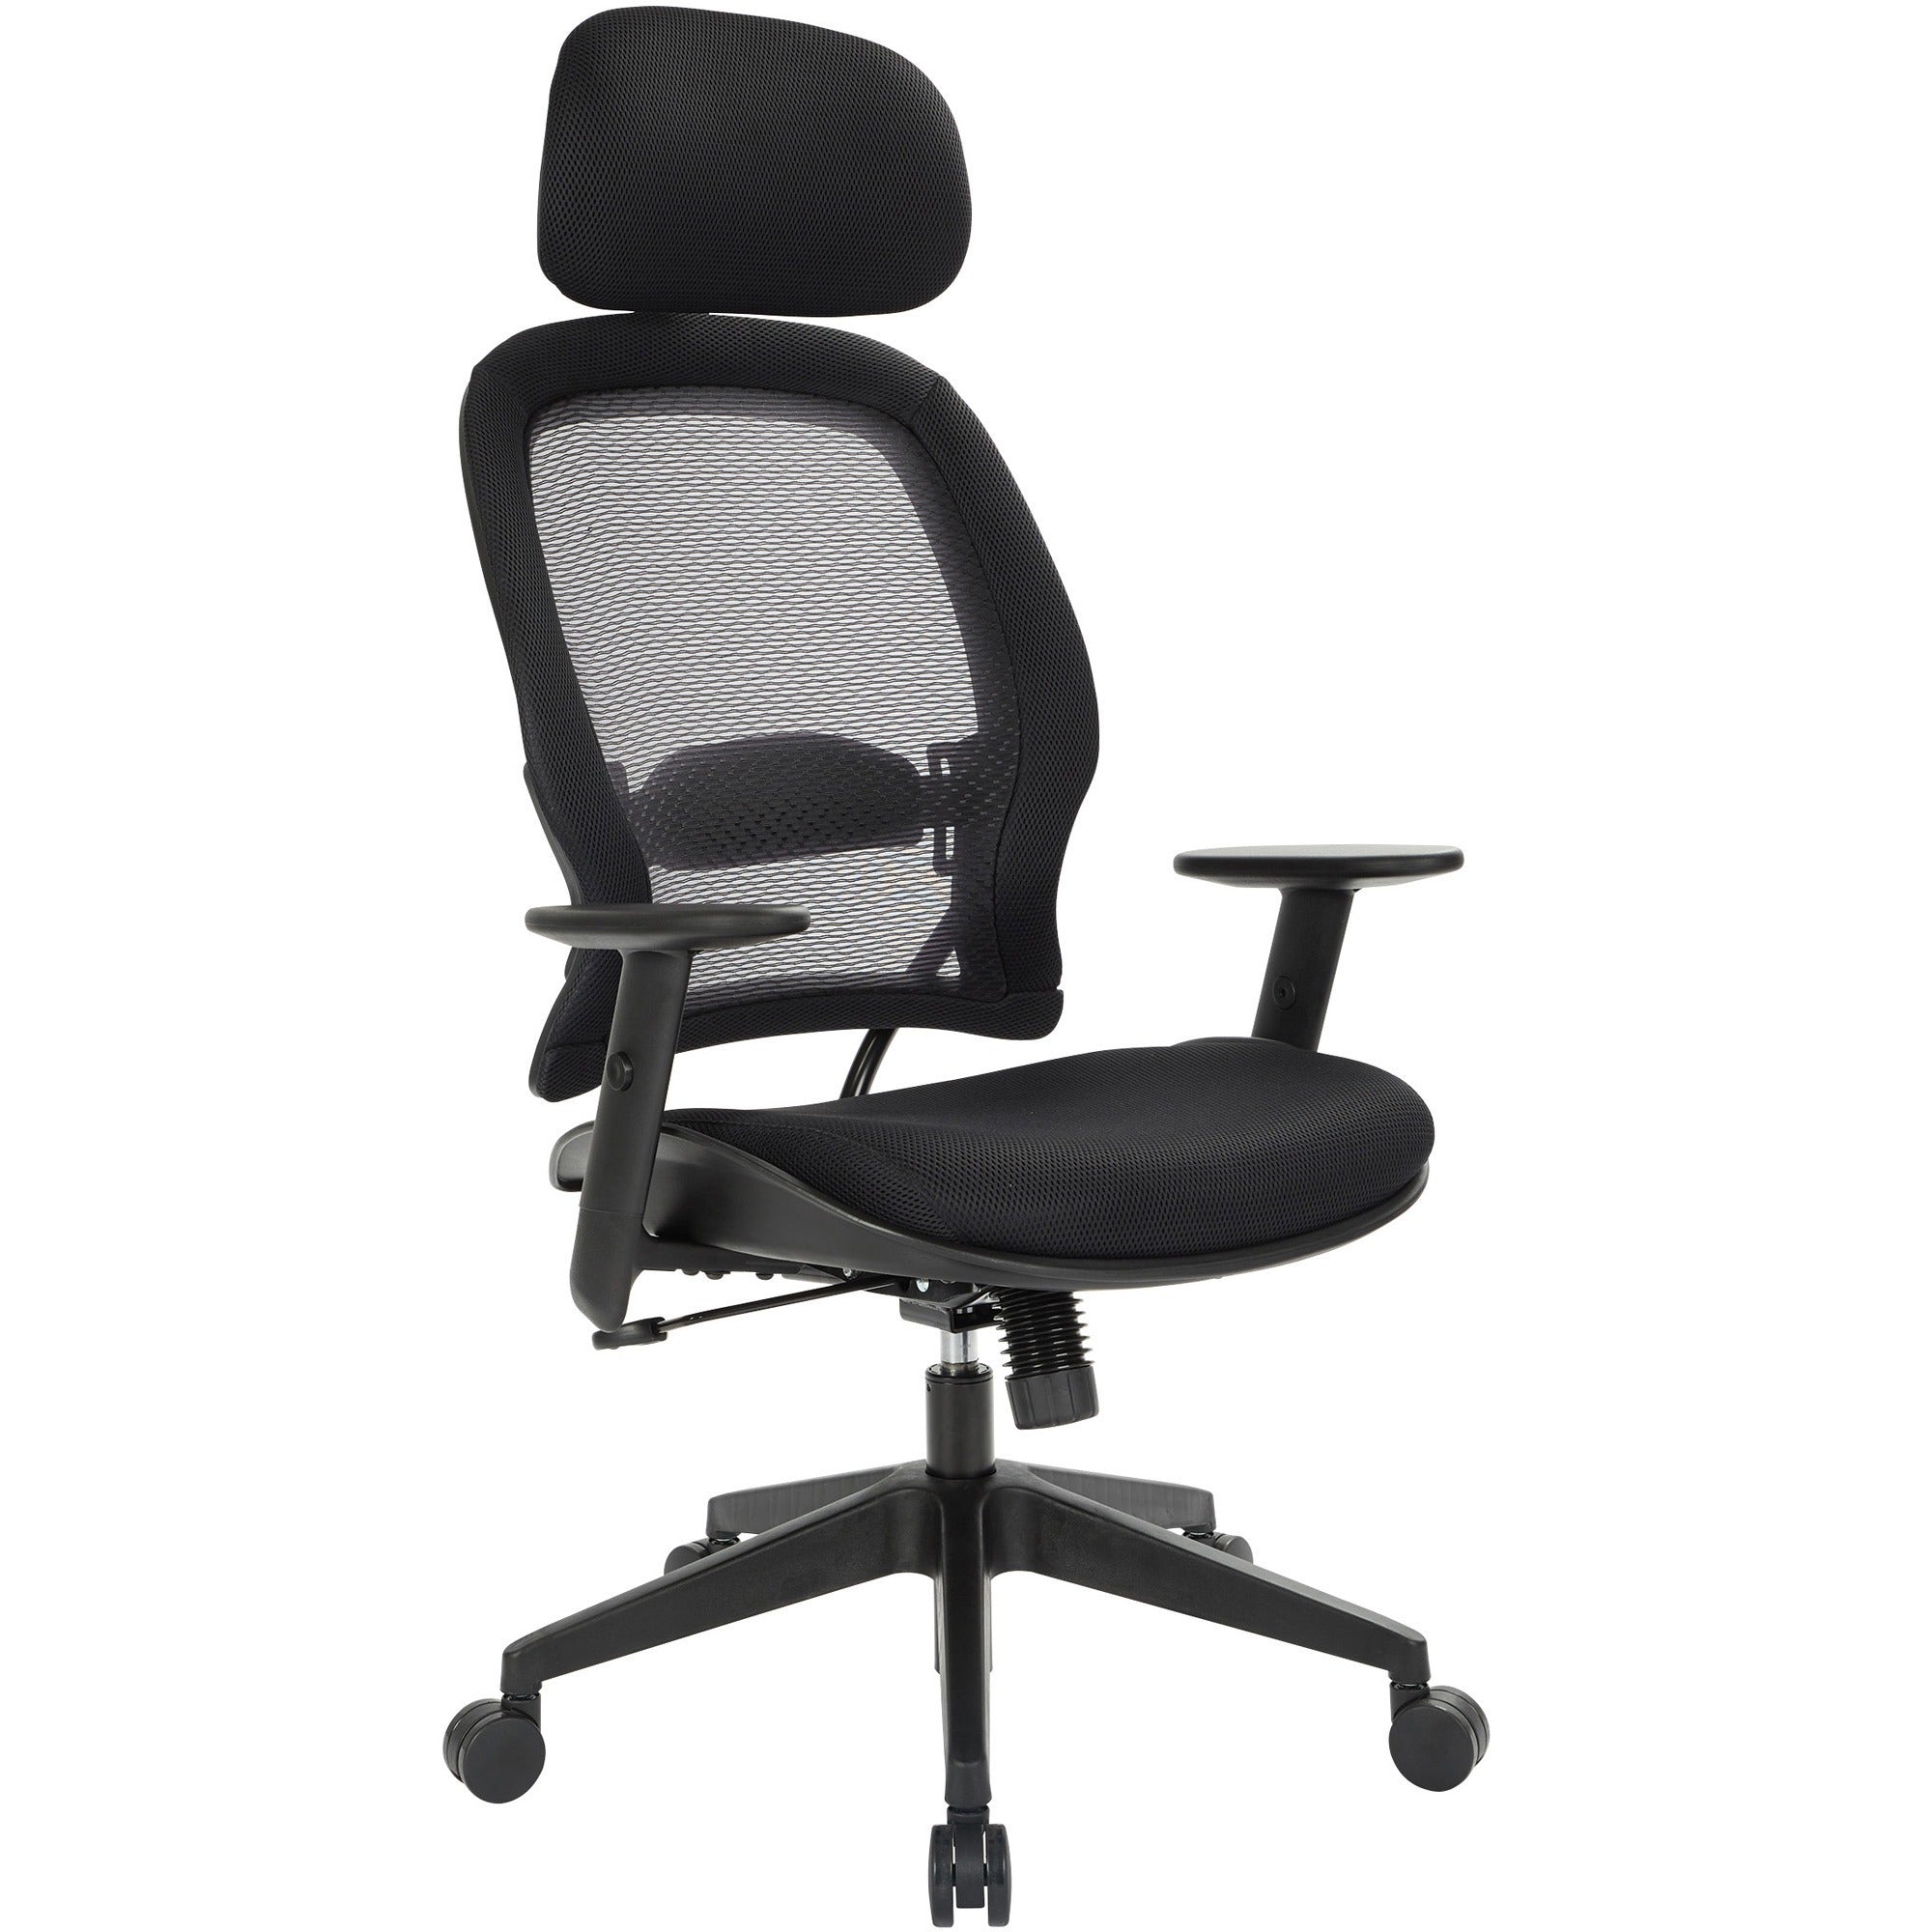 office-star-professional-air-grid-chair-with-adjustable-headrest-mesh-seat-5-star-base-black-1-each_osp55403 - 1